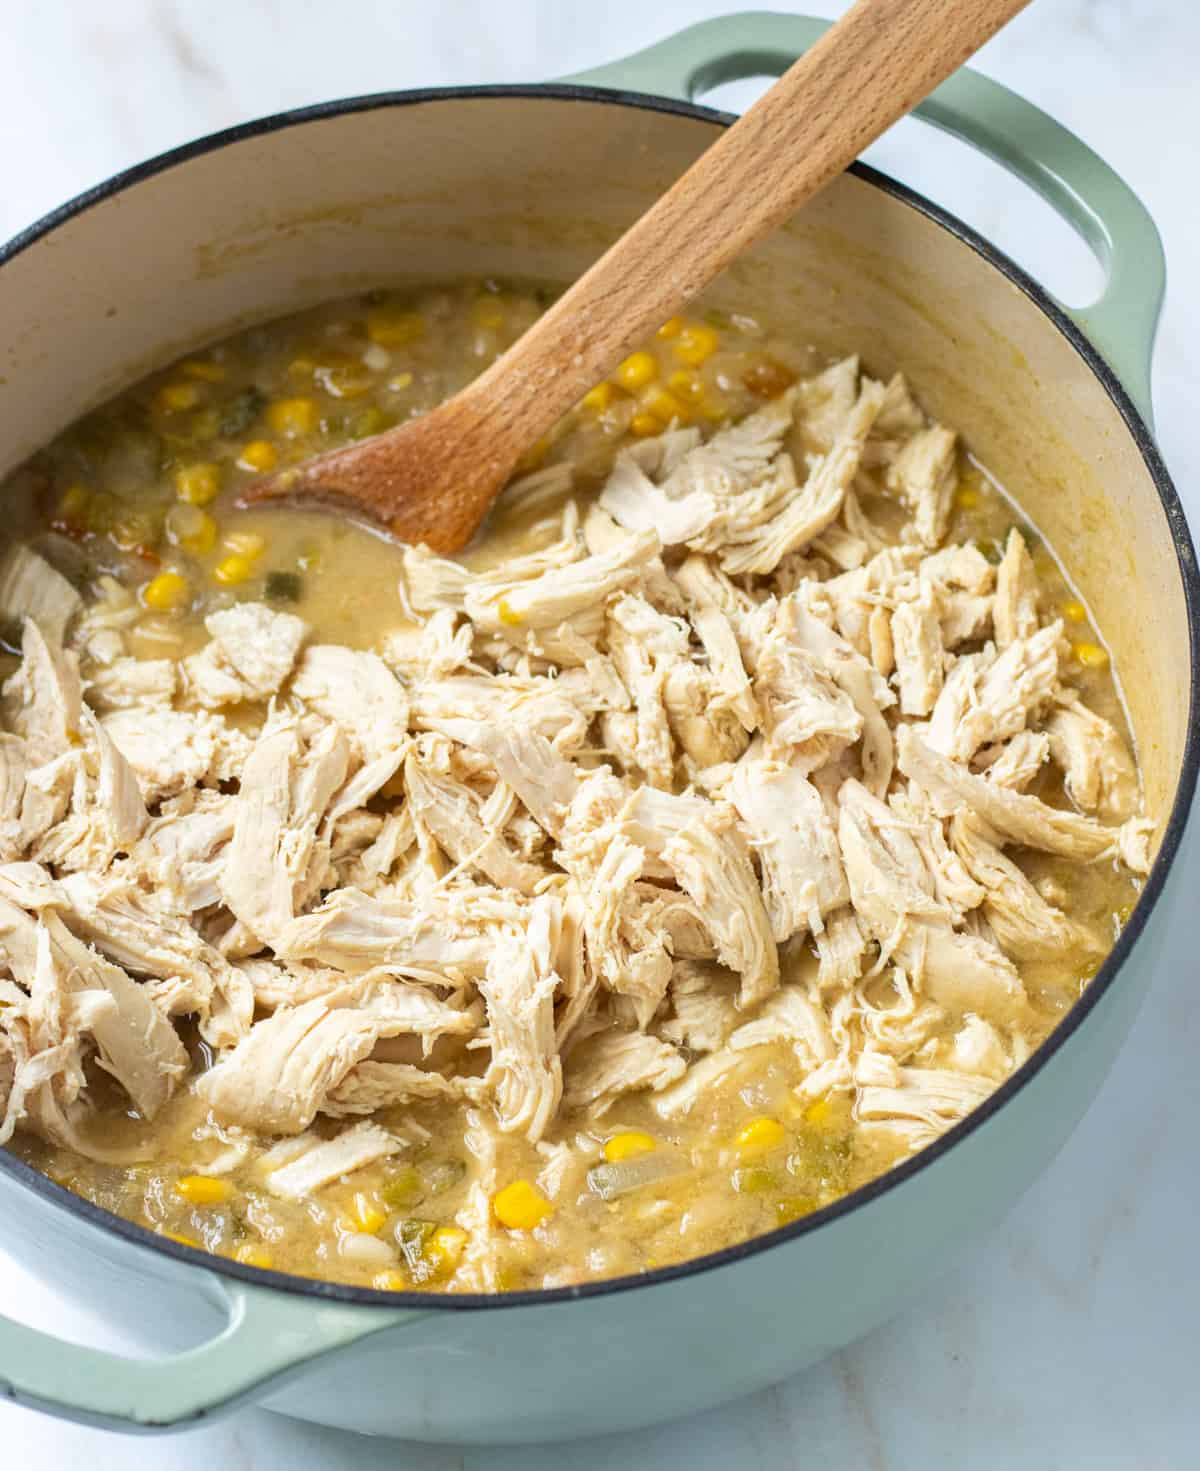 Shredded chicken added back to the pot of white chicken chili with a wood spoon.